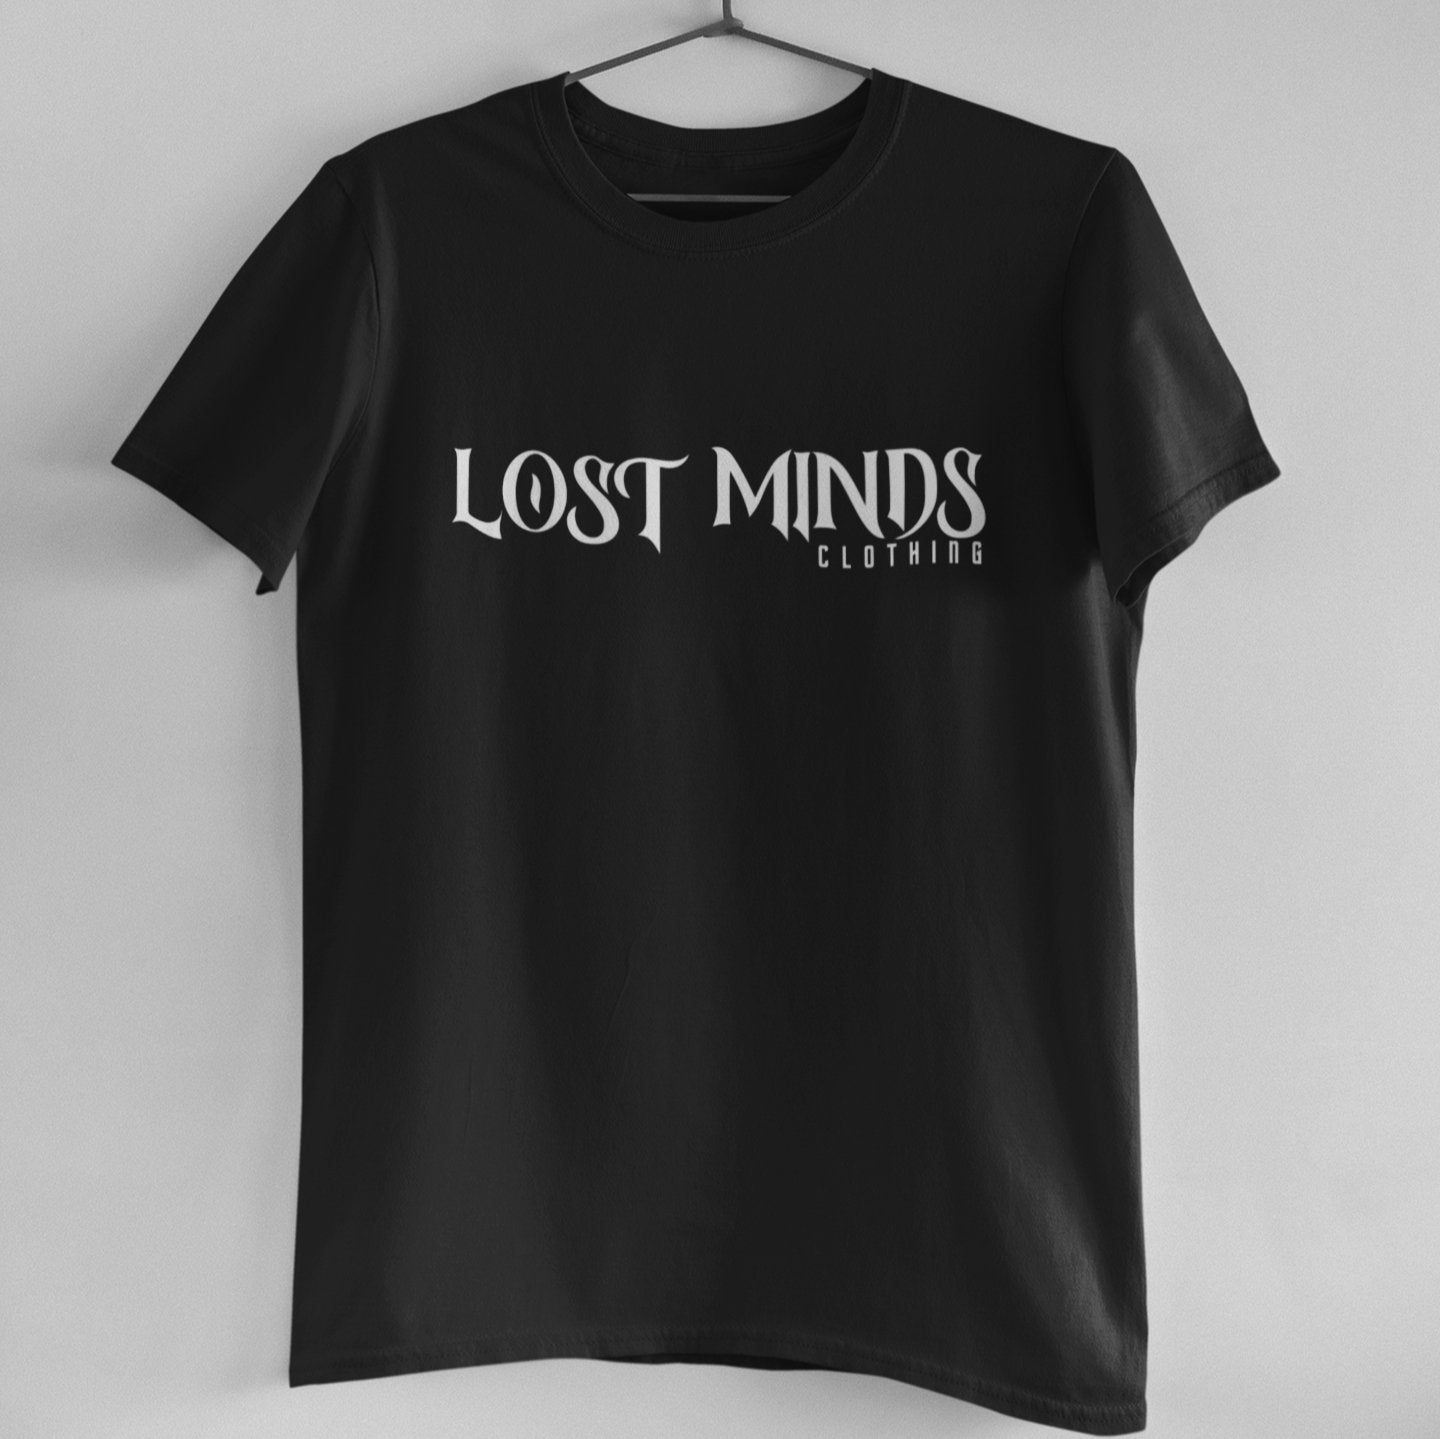 Lost Minds Unisex Tee - Black - Lost Minds Clothing